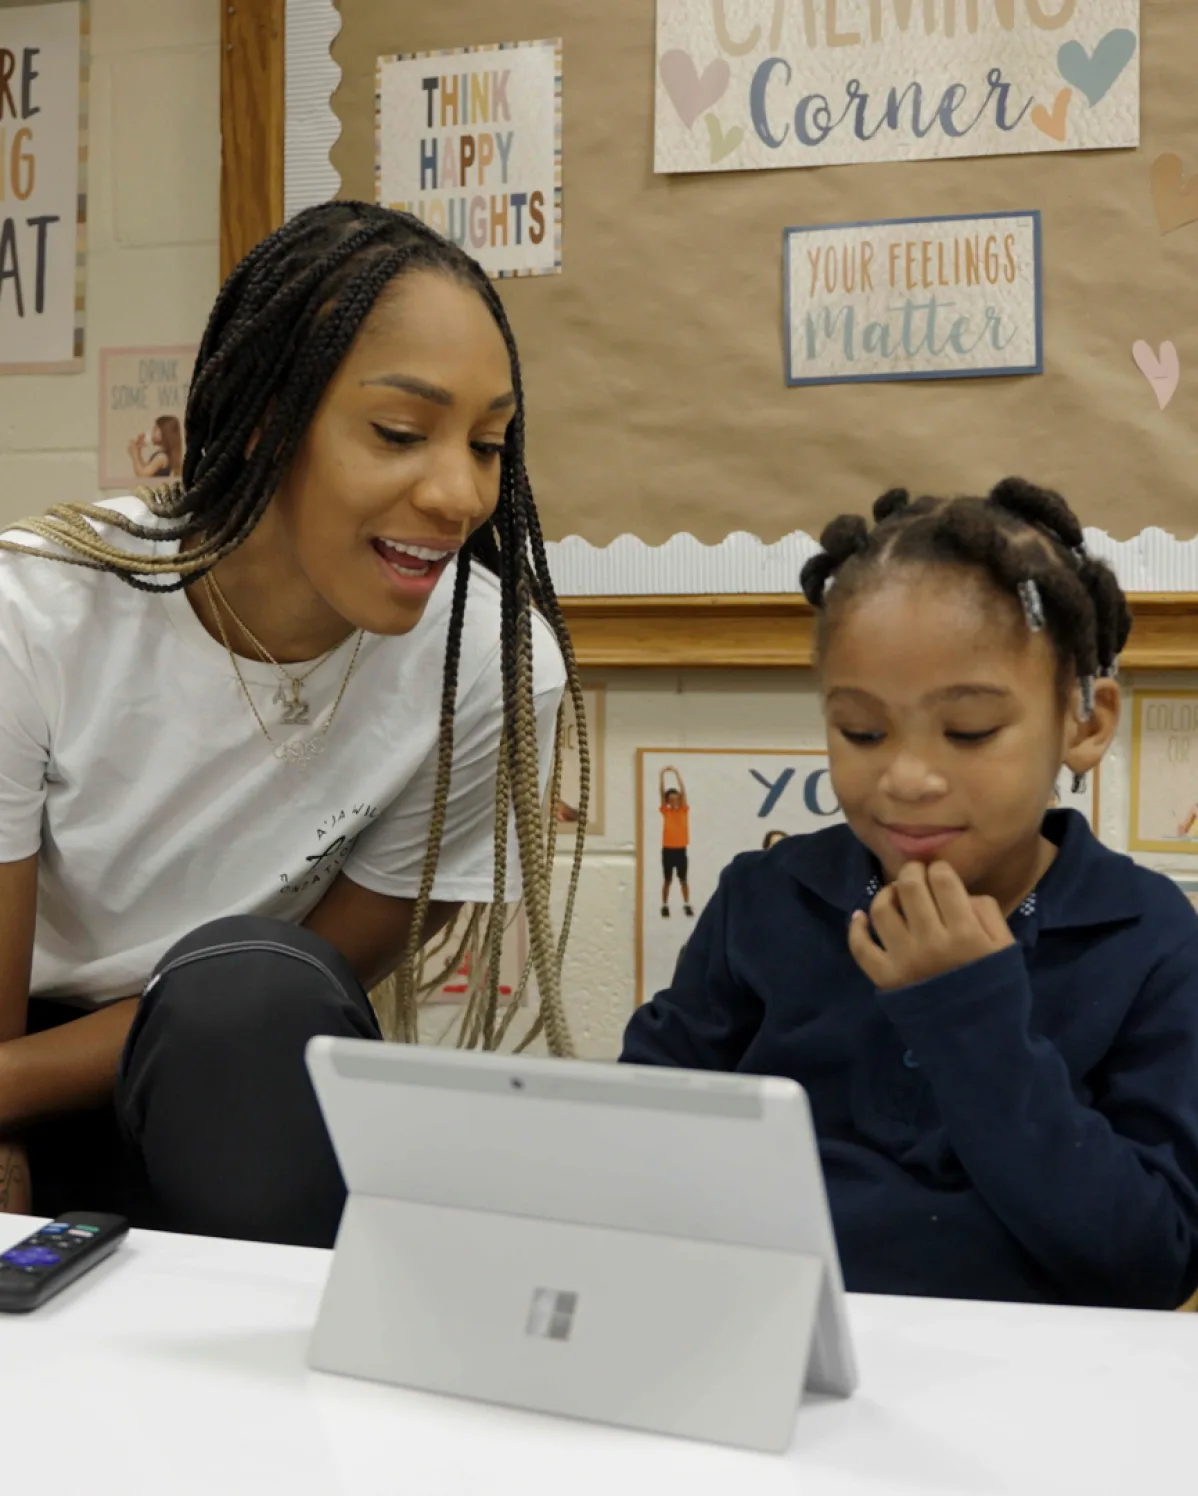 A’ja Wilson watches a young girl use a Microsoft Surface device in a classroom.